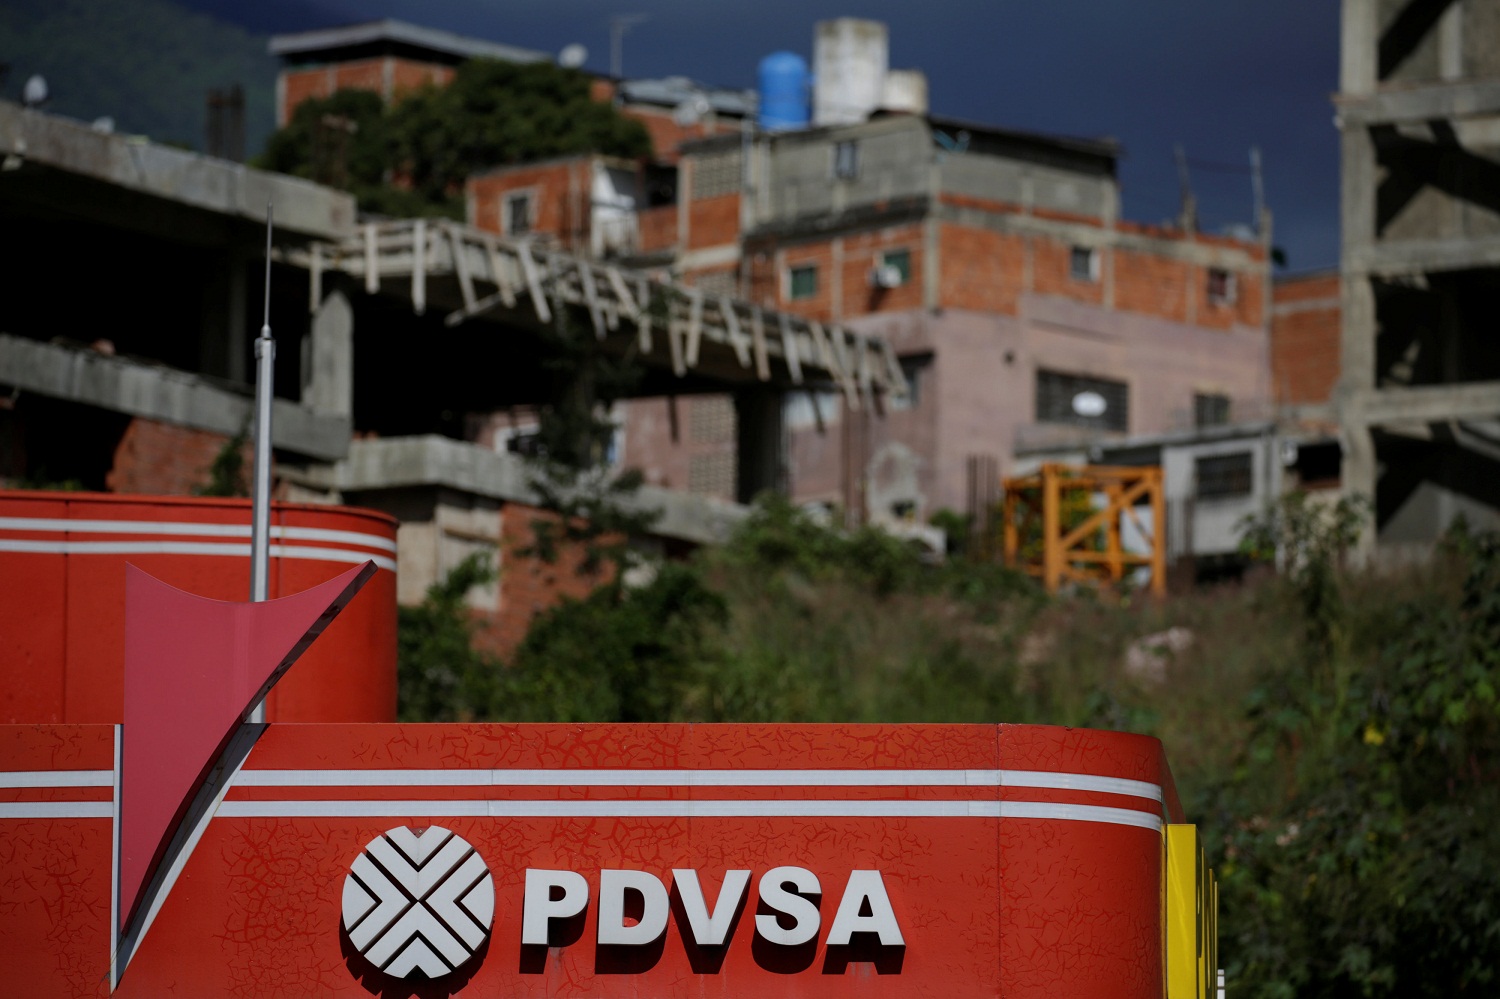 The logo of the Venezuelan state oil company PDVSA is seen at a gas station in Caracas, Venezuela January 11, 2017. Picture taken January 11, 2017. REUTERS/Marco Bello